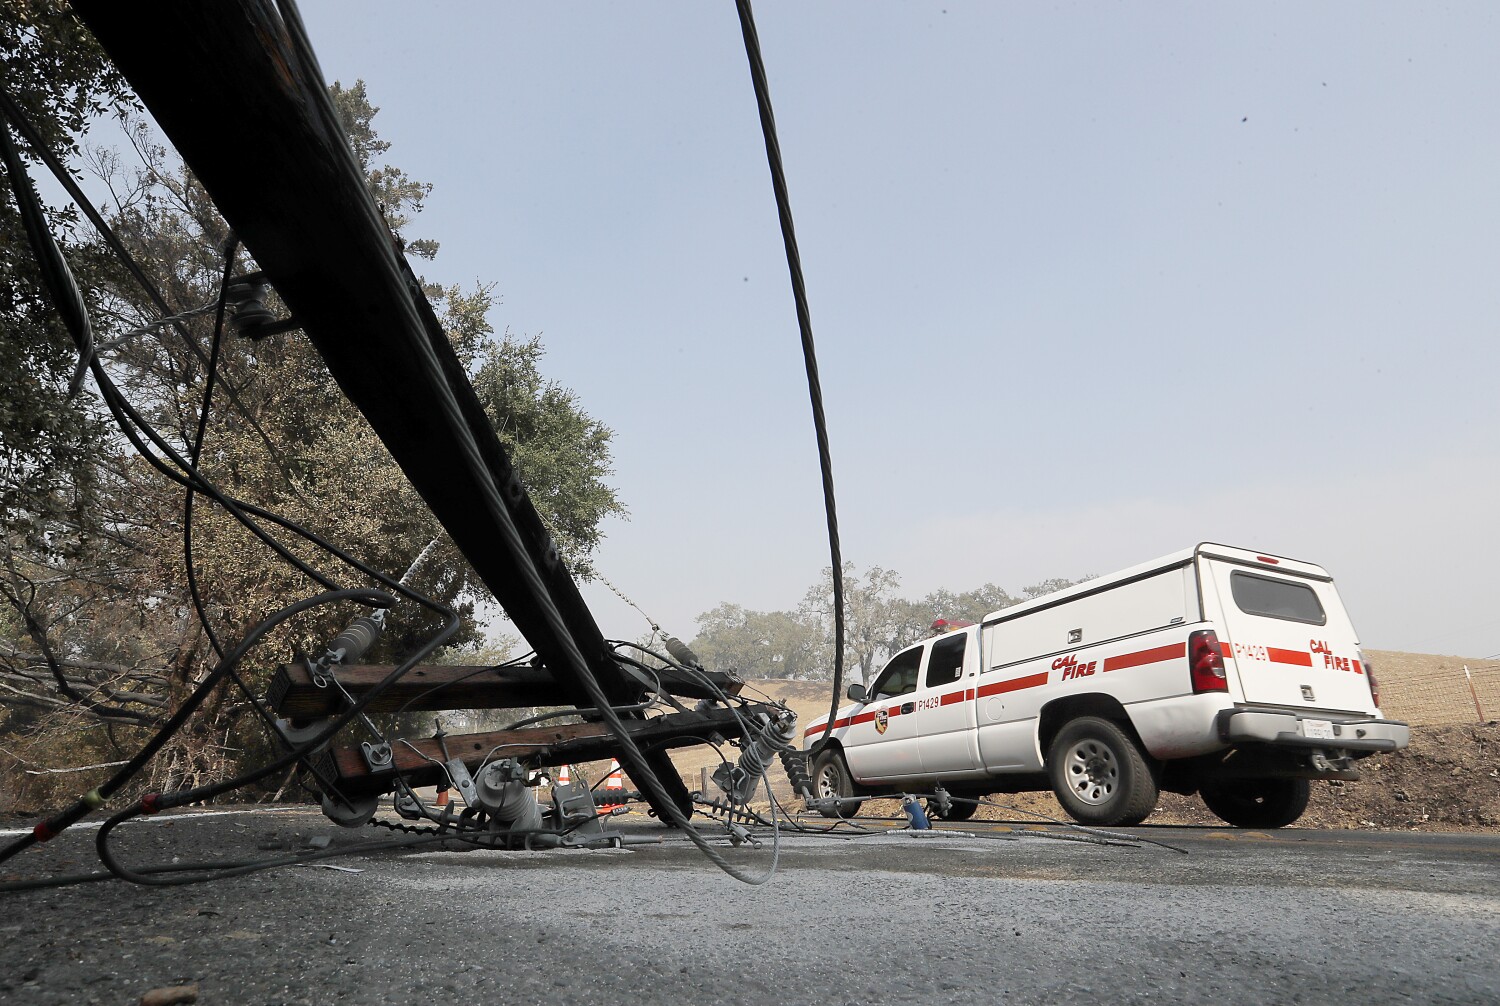 PG&E to pay $125 million in fines and penalties under Kincade fire settlement